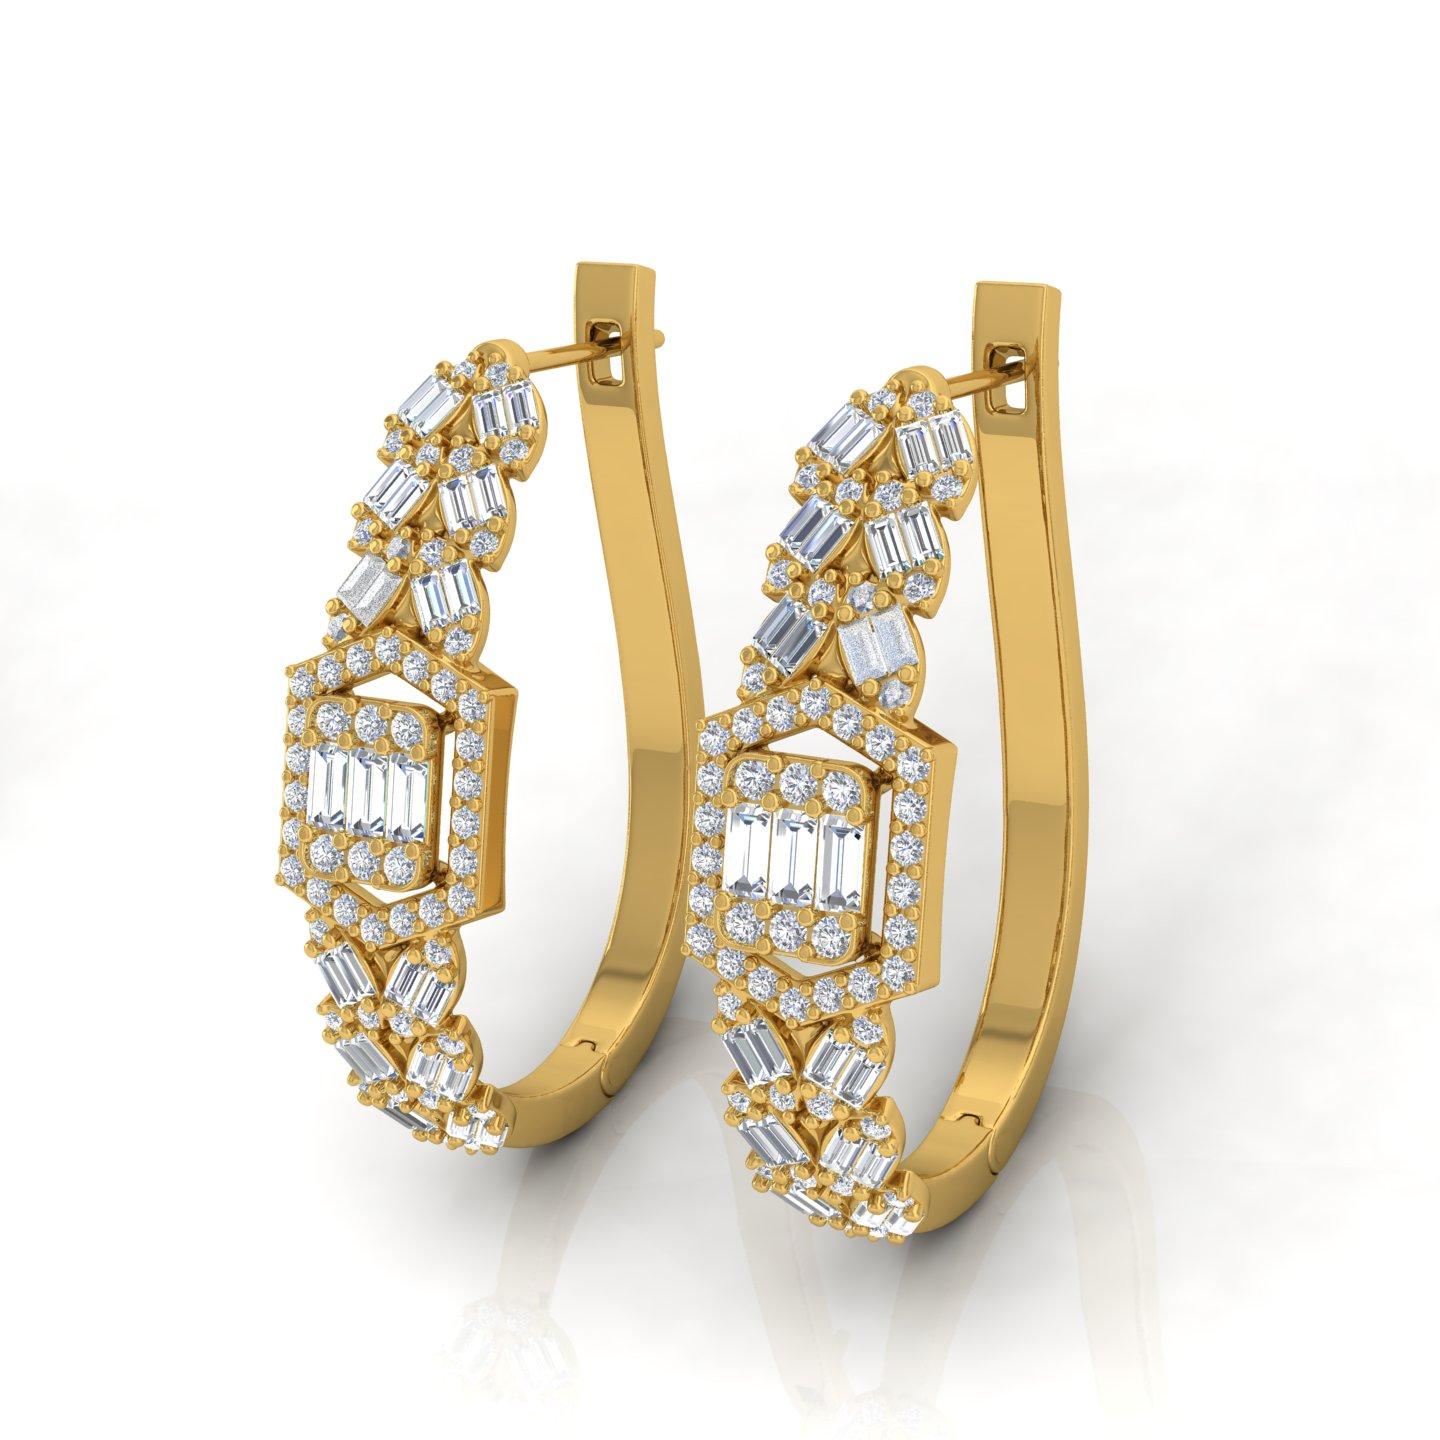 Item Code :- CN-26187
Gross Wt. :- 8.78 gm
18k Yellow Gold Wt. :- 8.44 gm
Diamond Wt. :- 1.70 Ct. ( AVERAGE DIAMOND CLARITY SI1-SI2 & COLOR H-I )
Earrings Size :- 29 mm approx.

✦ Sizing
.....................
We can adjust most items to fit your